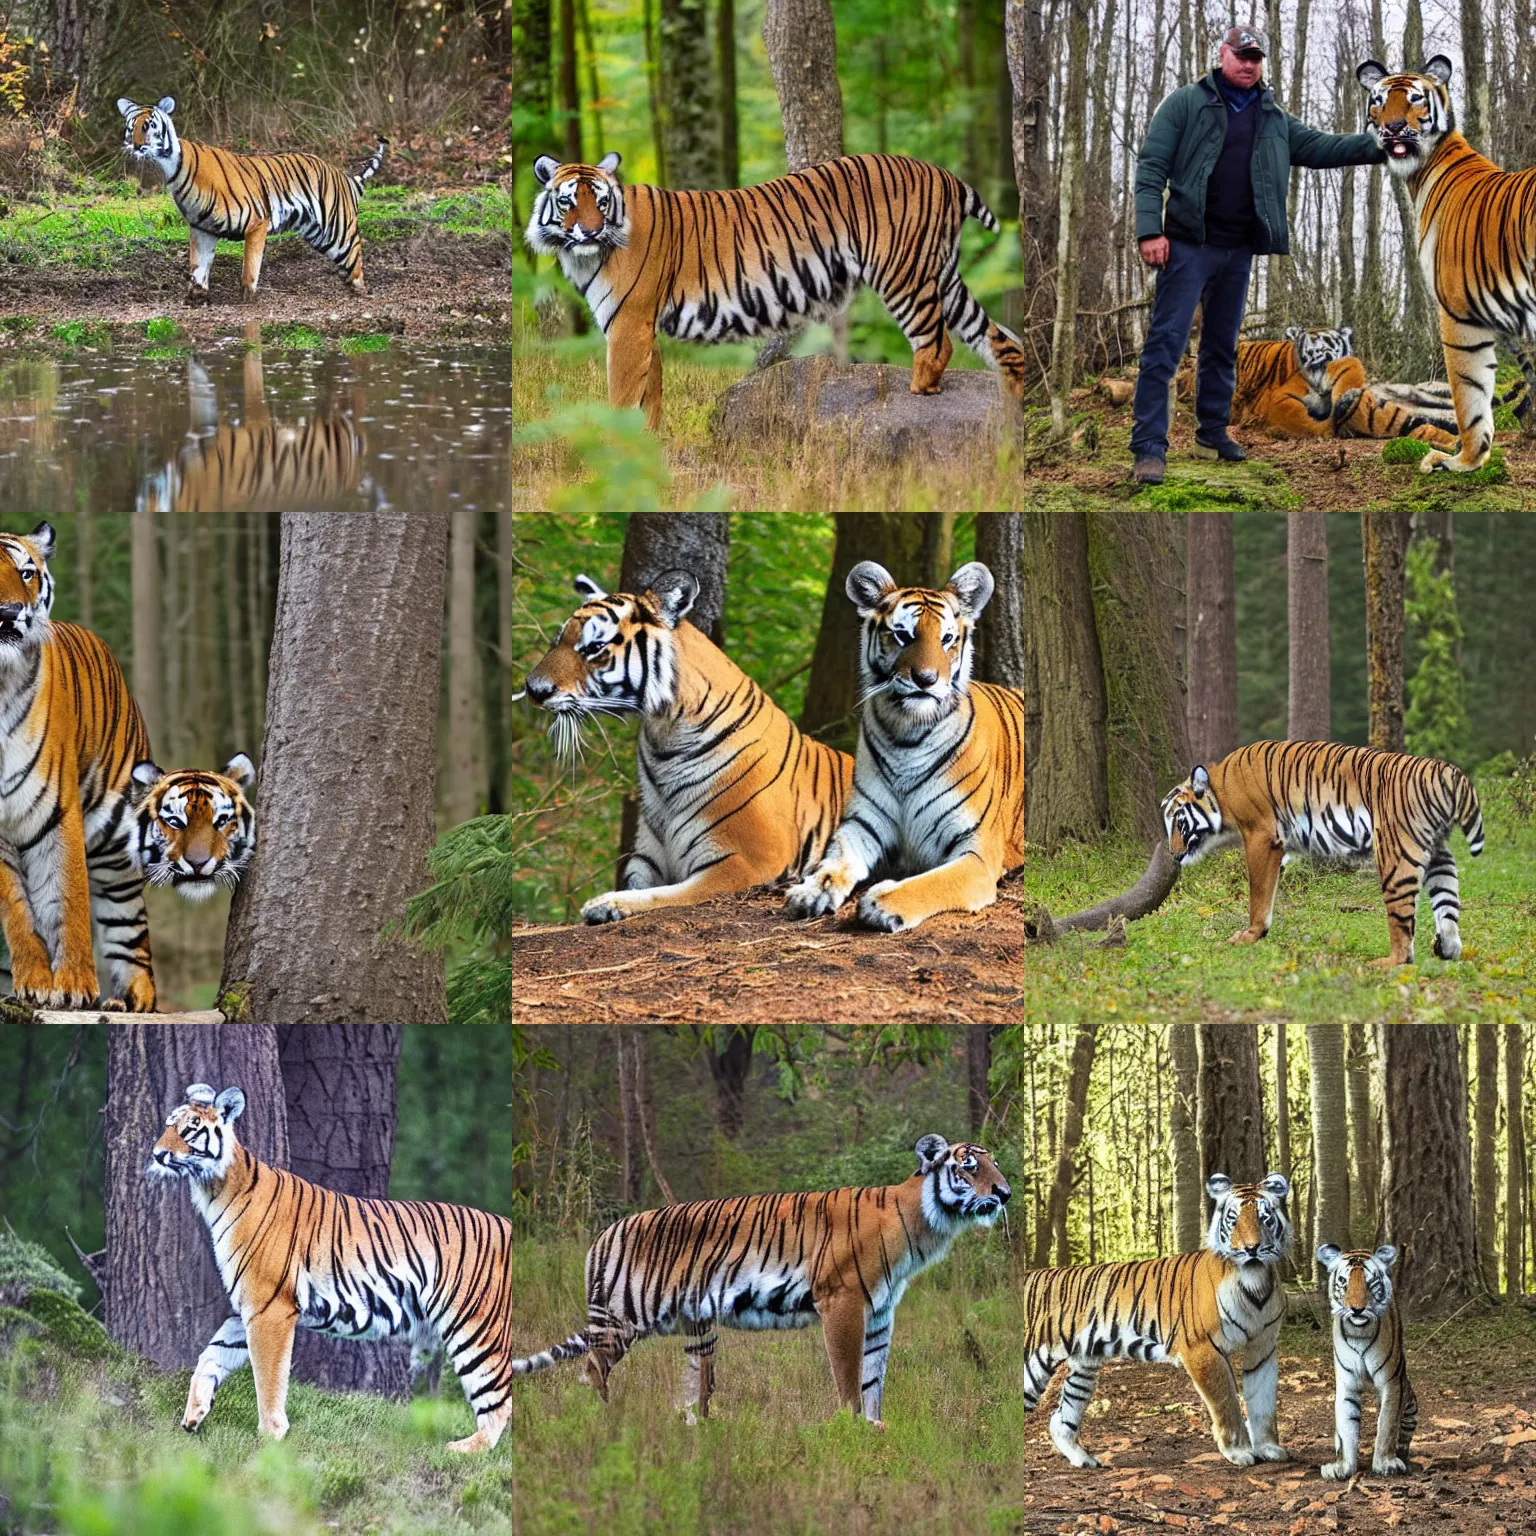 Prompt: sherwood greg in close each to by deer rutkowski standing tiger other forest and